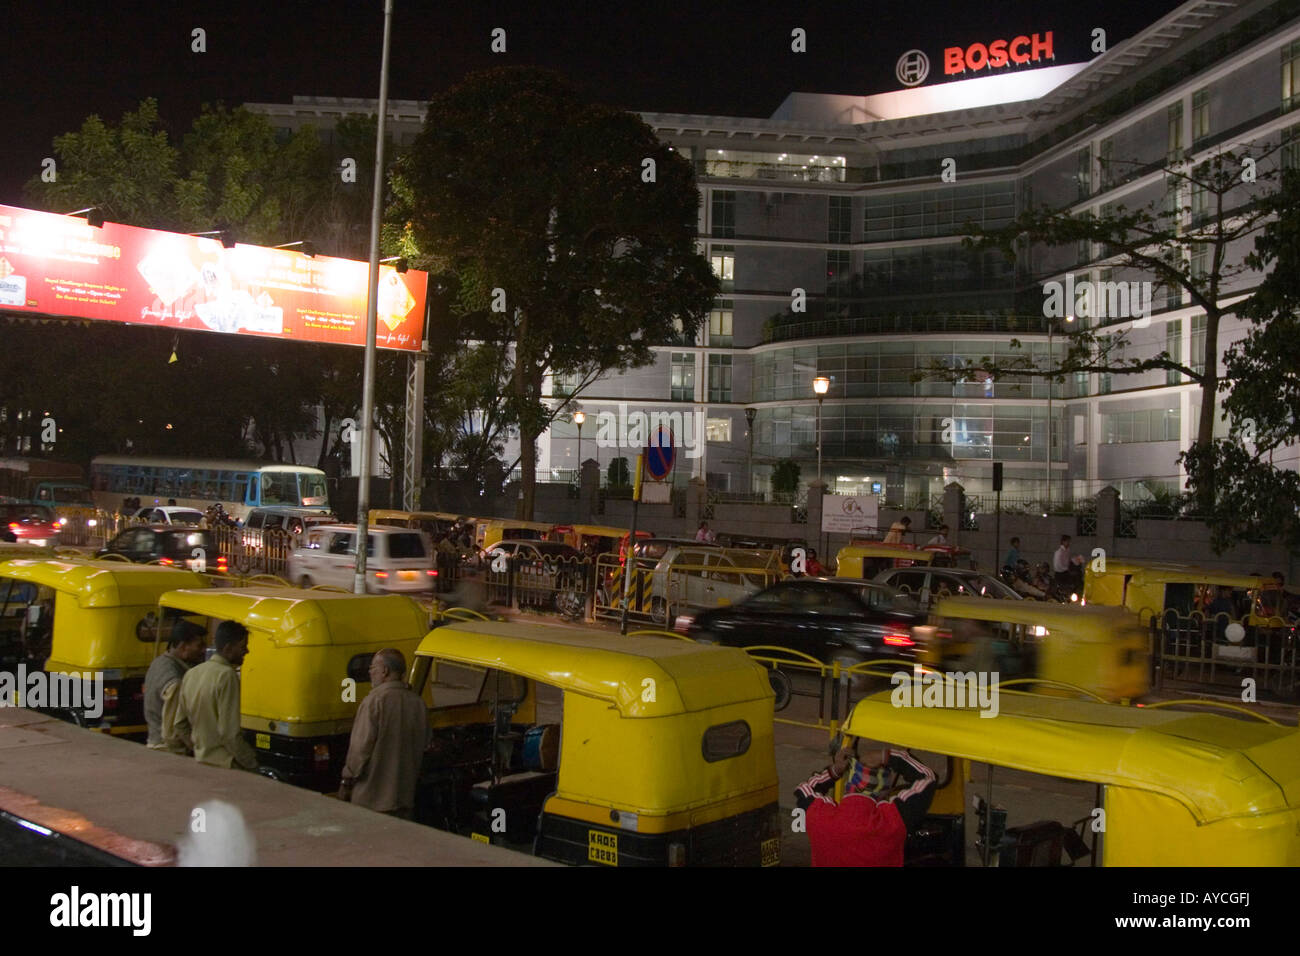 Queue of auto rickshaw taxis and drivers outside a shopping mall in Bangalore India Stock Photo